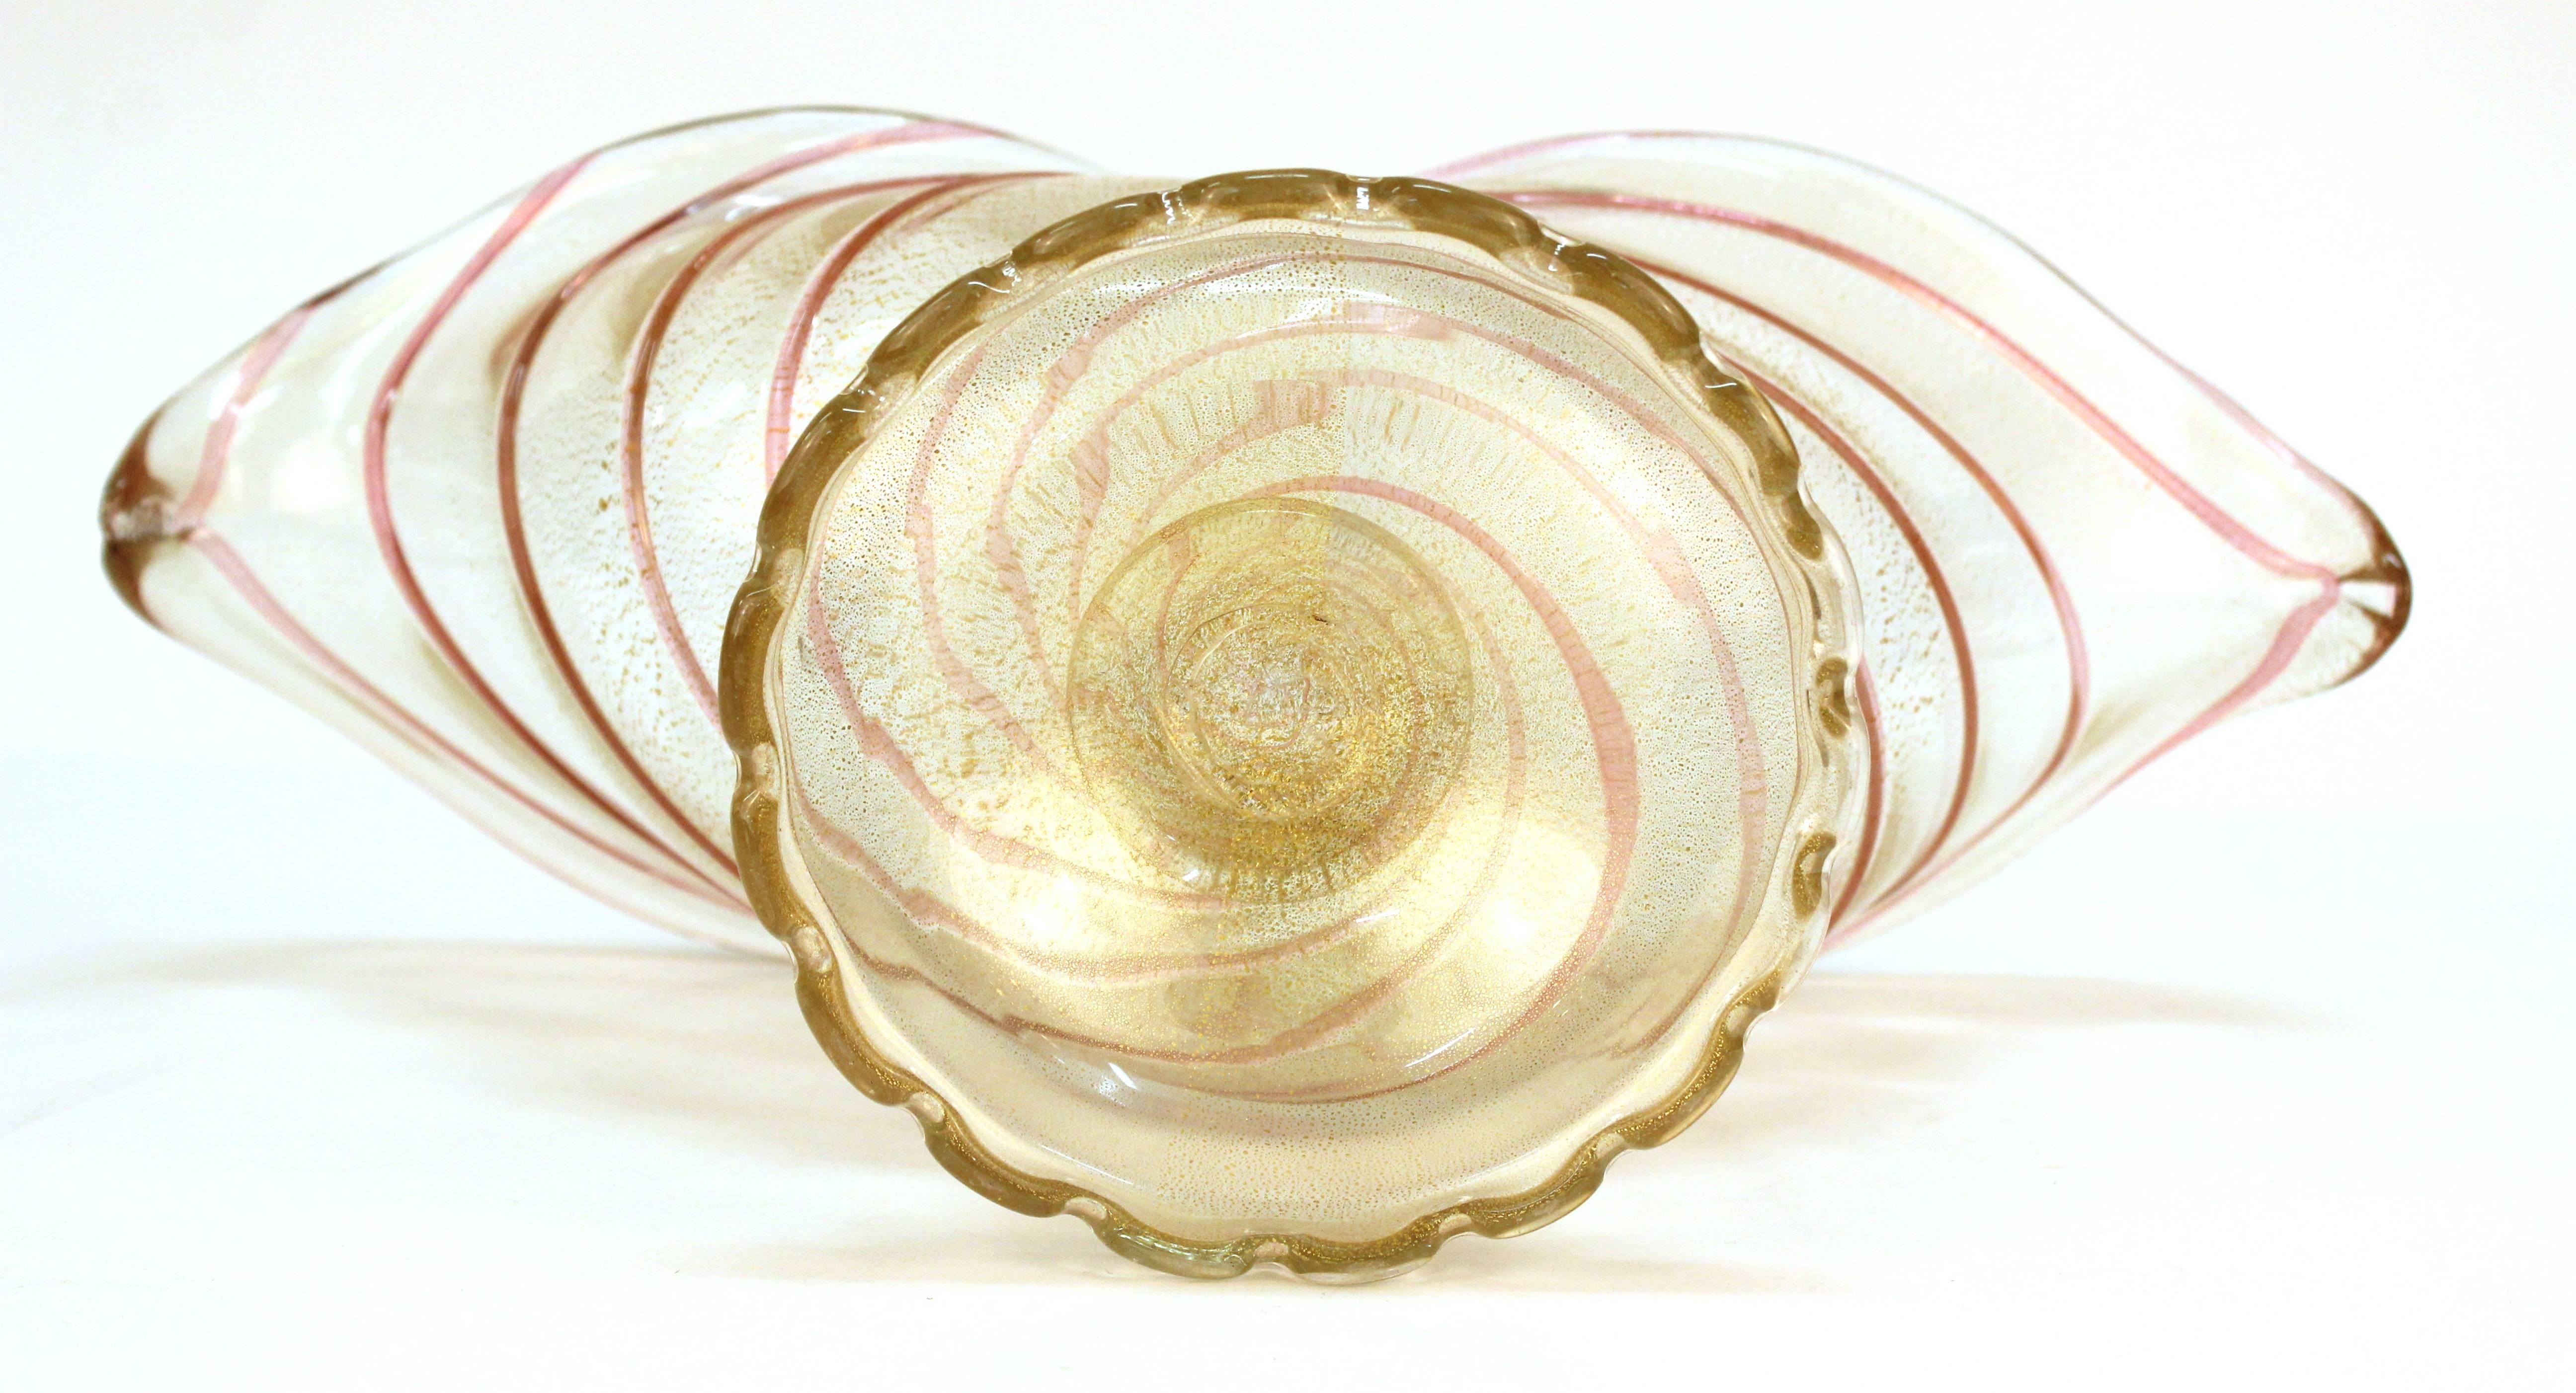 20th Century Murano Glass Vase or Bowl in Swirl Pattern with Gold Flakes